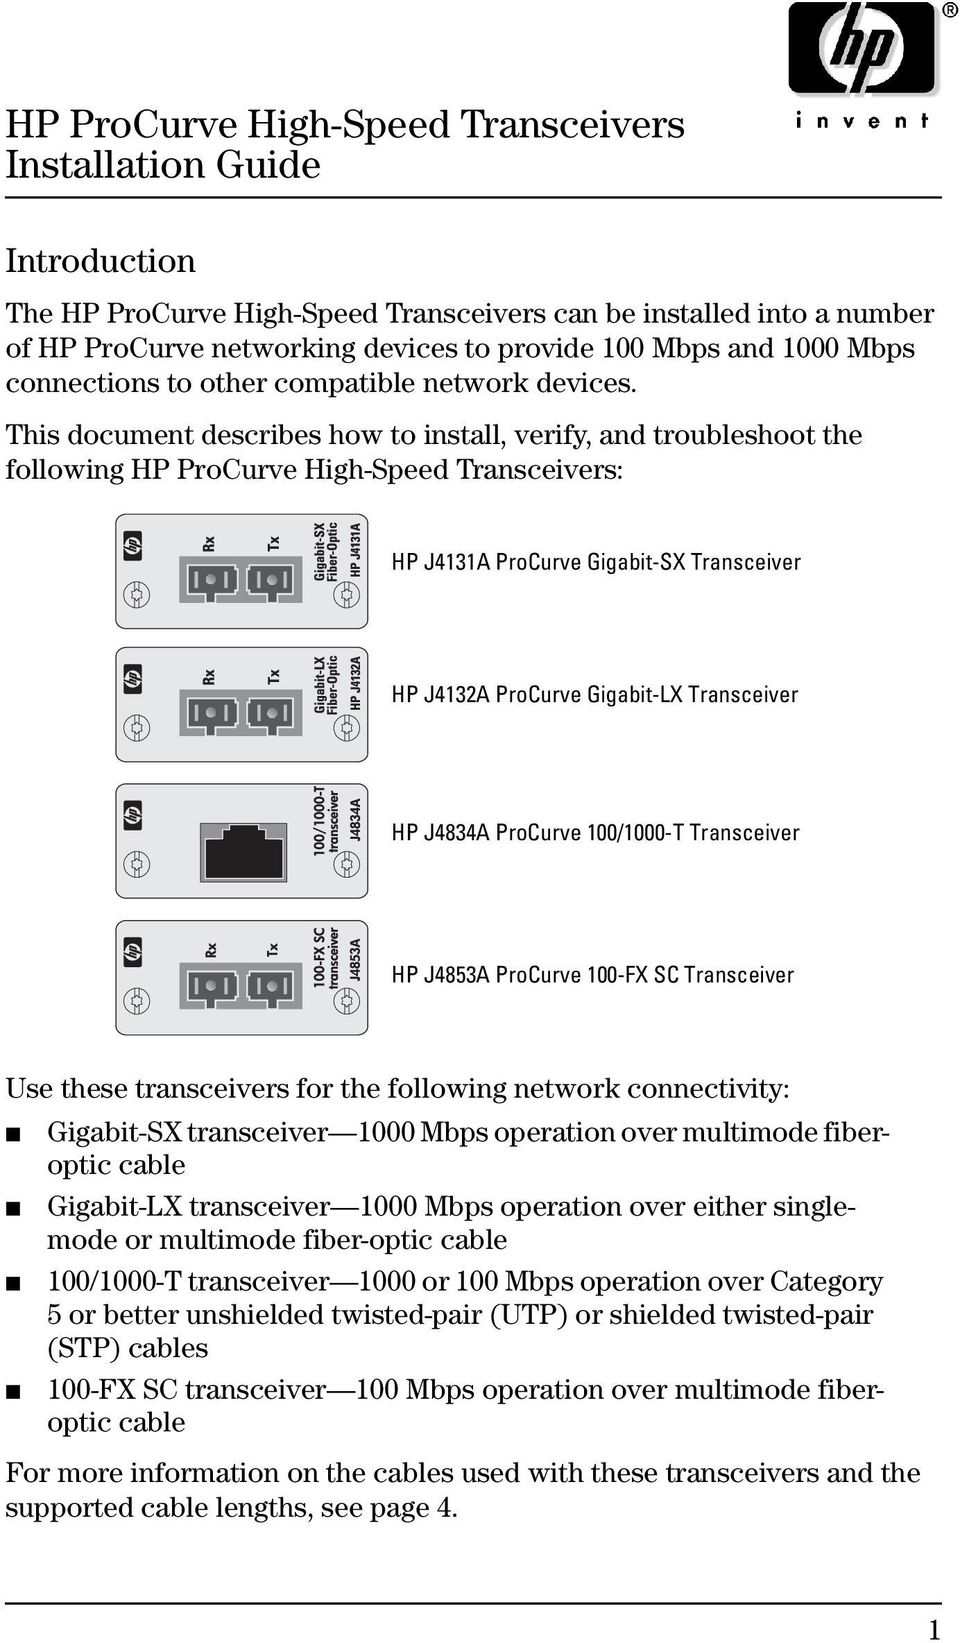 This document describes how to install, verify, and troubleshoot the following HP ProCurve High-Speed Transceivers: HP J4131A ProCurve Gigabit-SX Transceiver HP J4132A ProCurve Gigabit-LX Transceiver